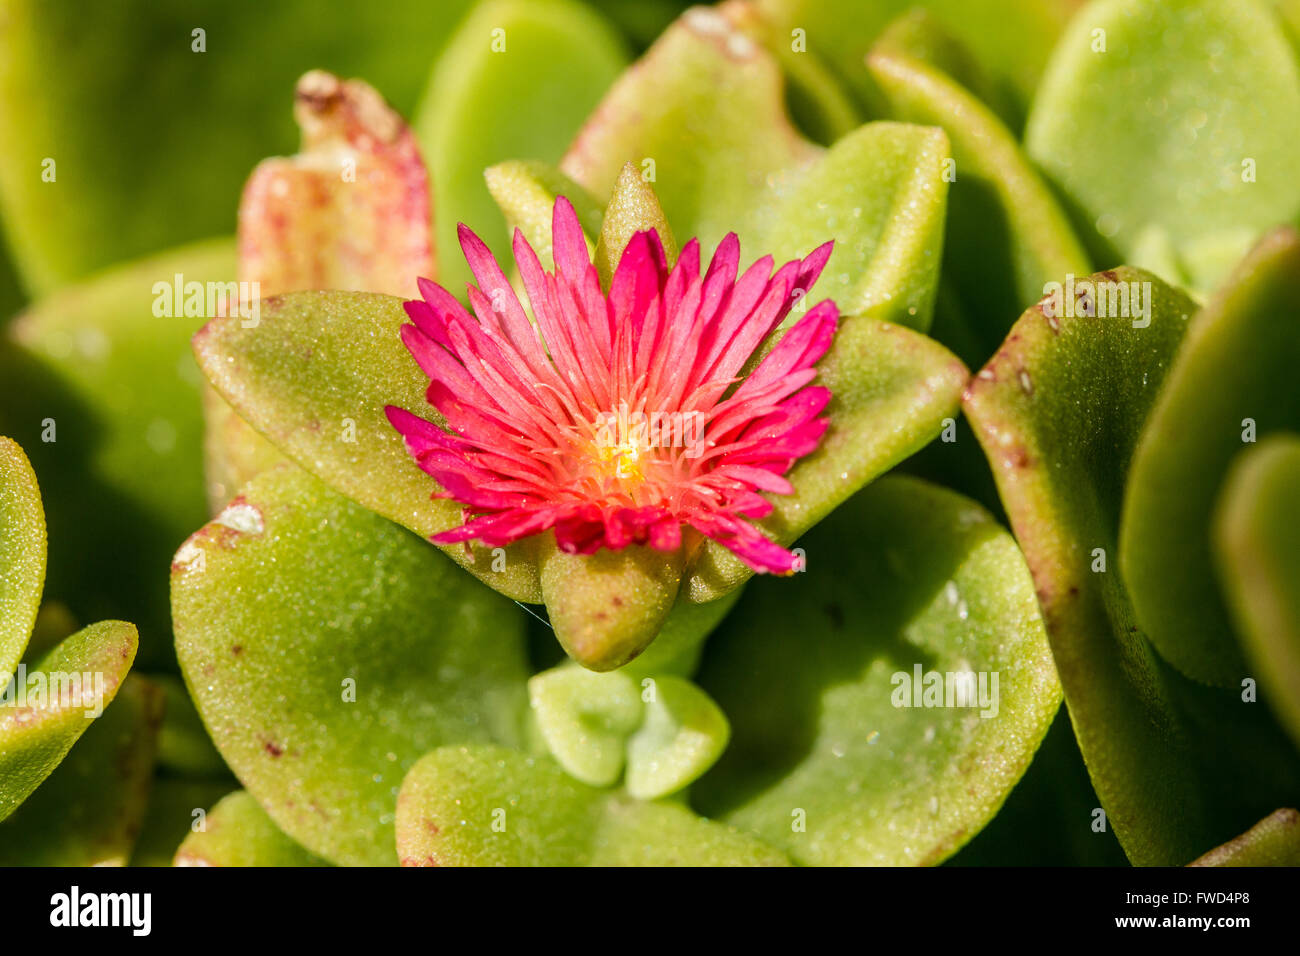 detail of red flower with yellow stamens Stock Photo